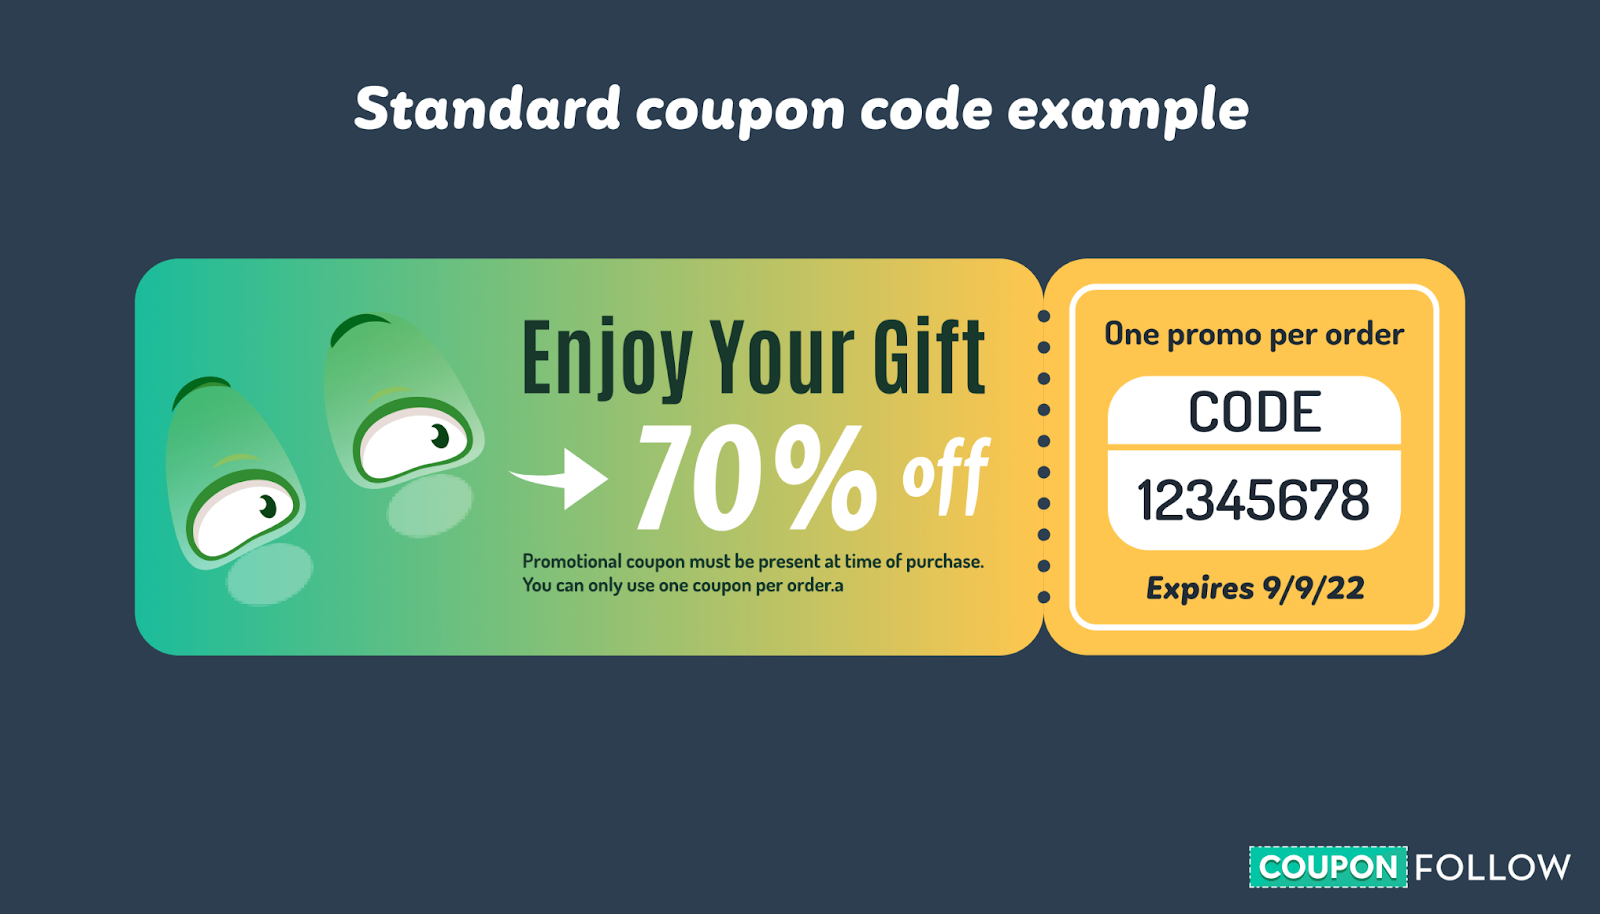 Illustration showing how a standard coupon code looks like